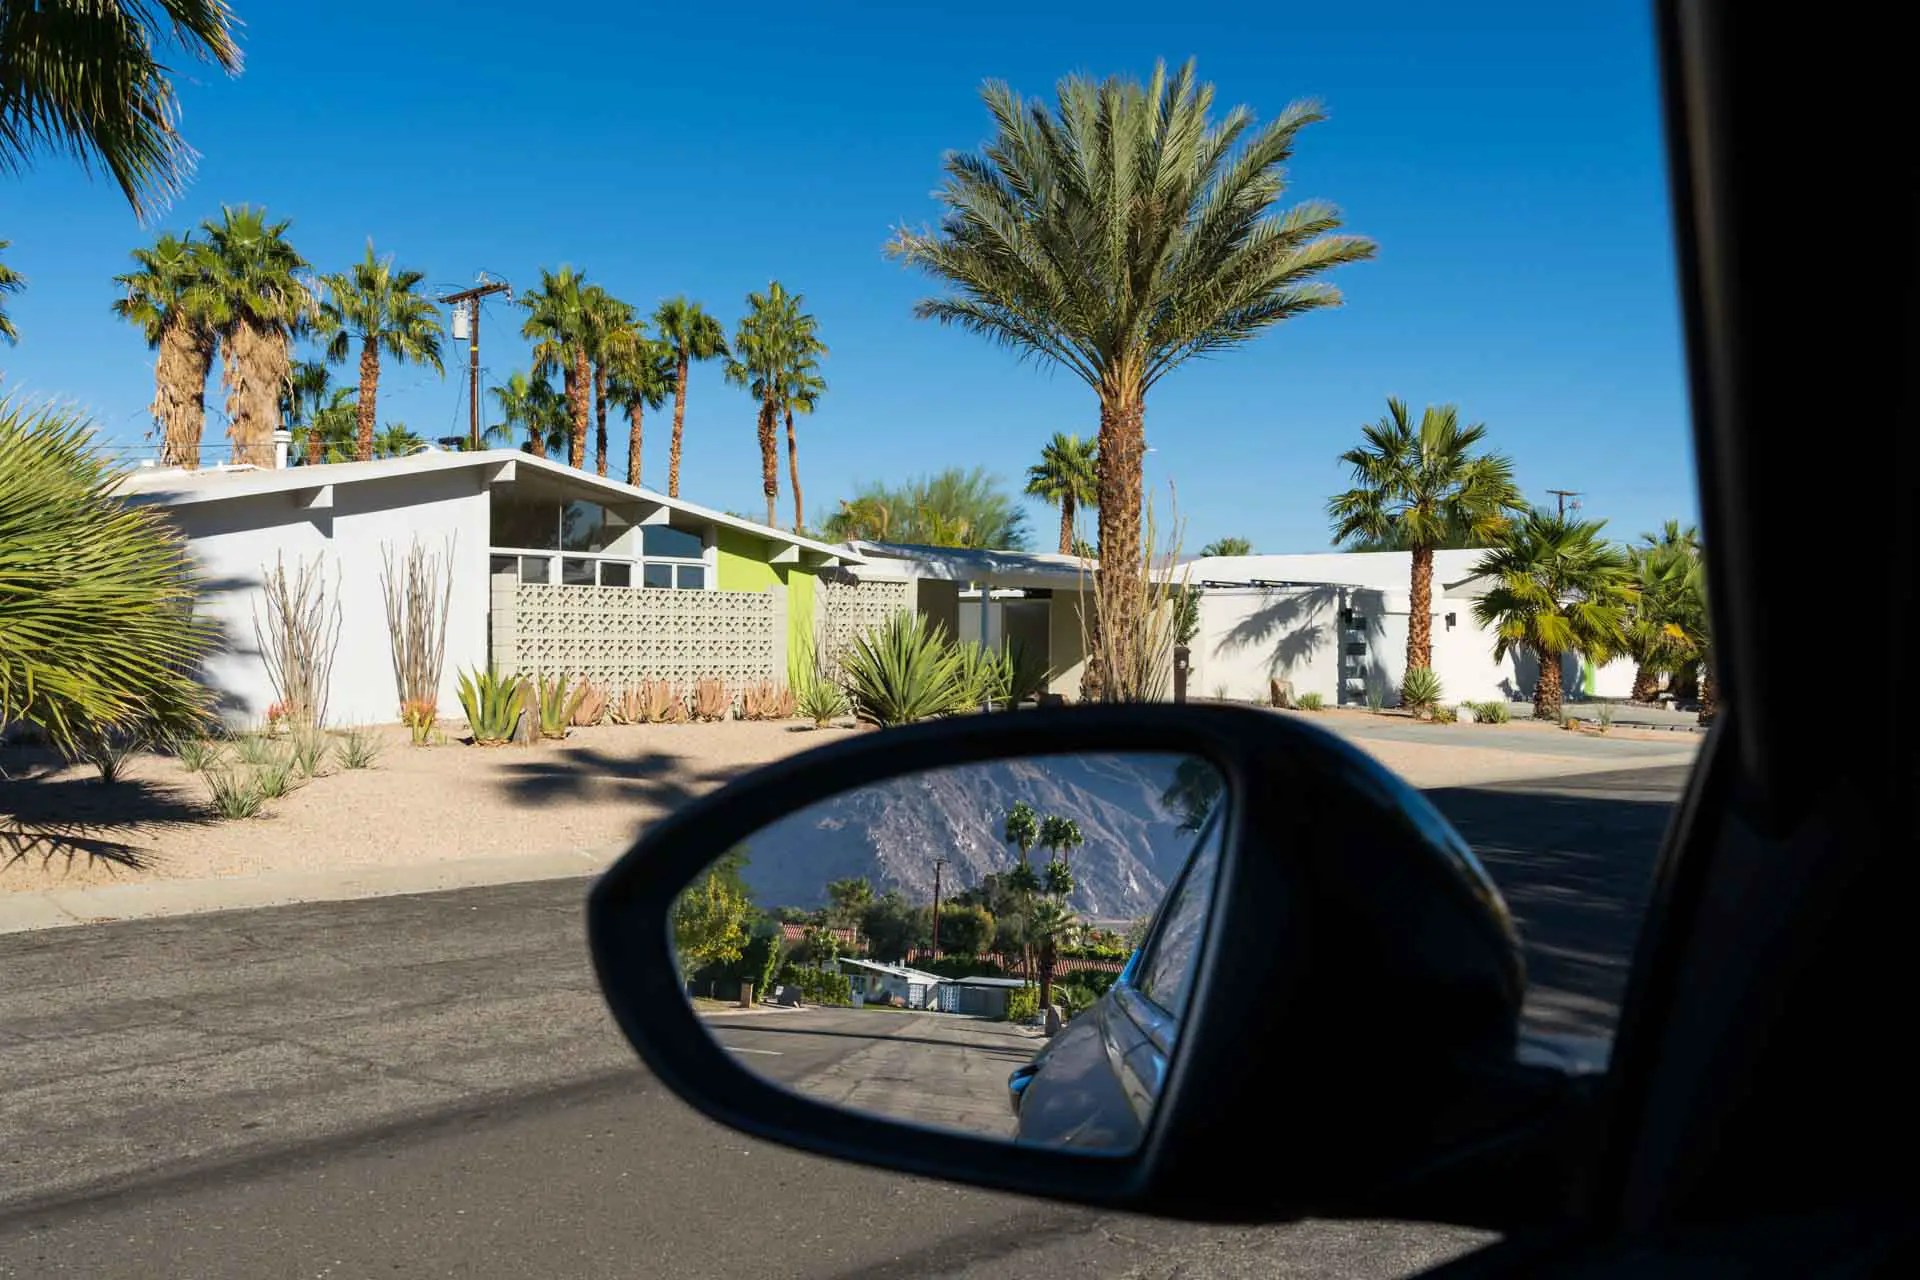 Mid-Century home reflected in rear-view mirror of car